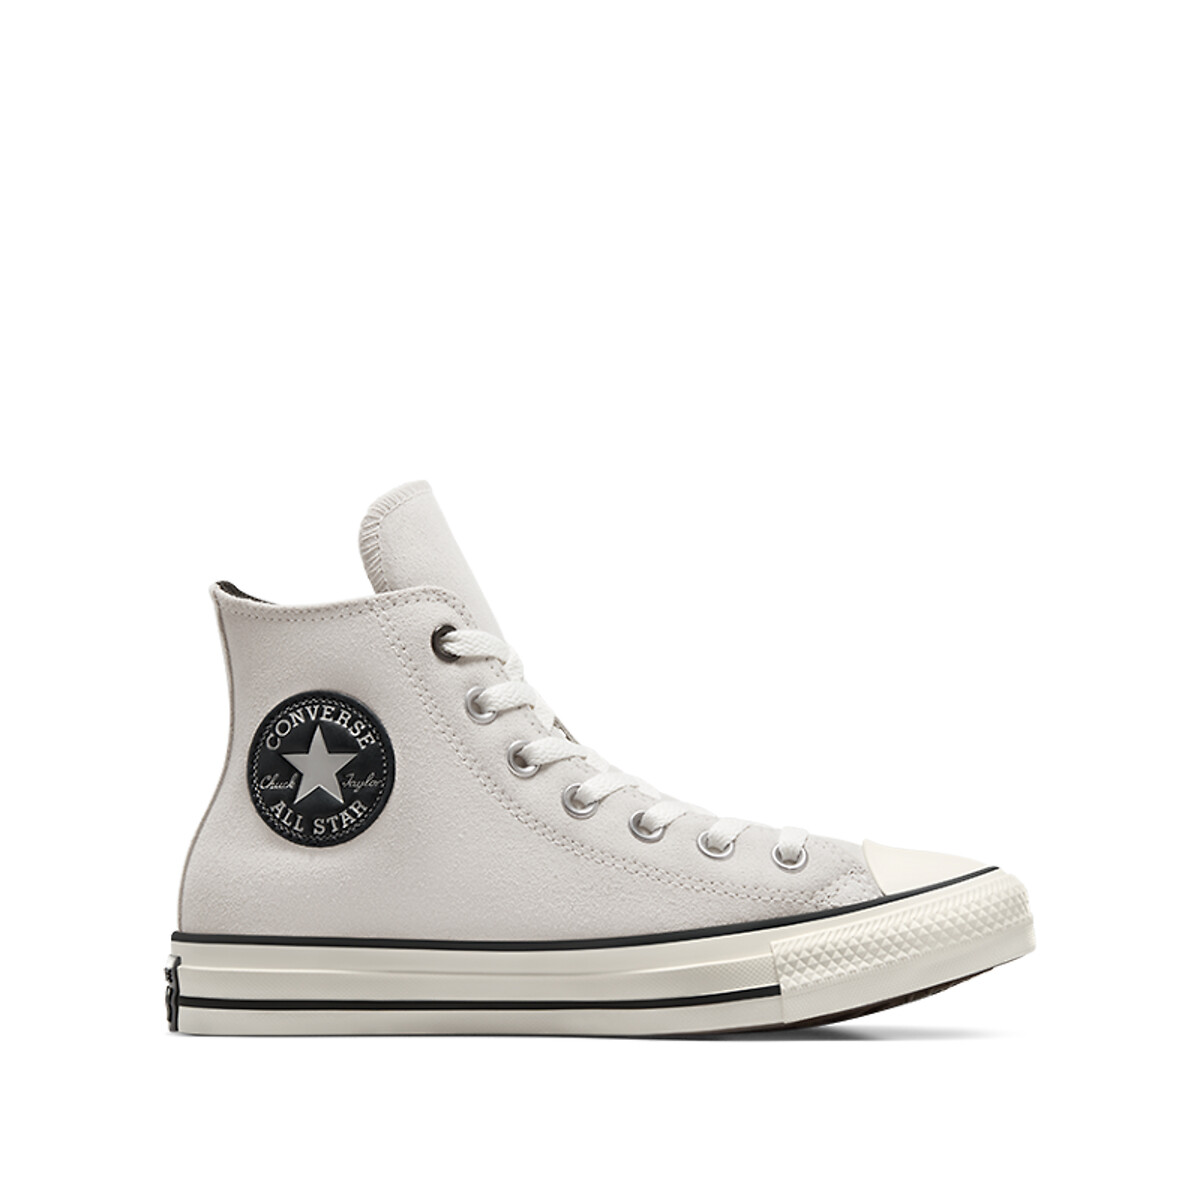 All Star Hi Counter Climate Suede High Top Trainers